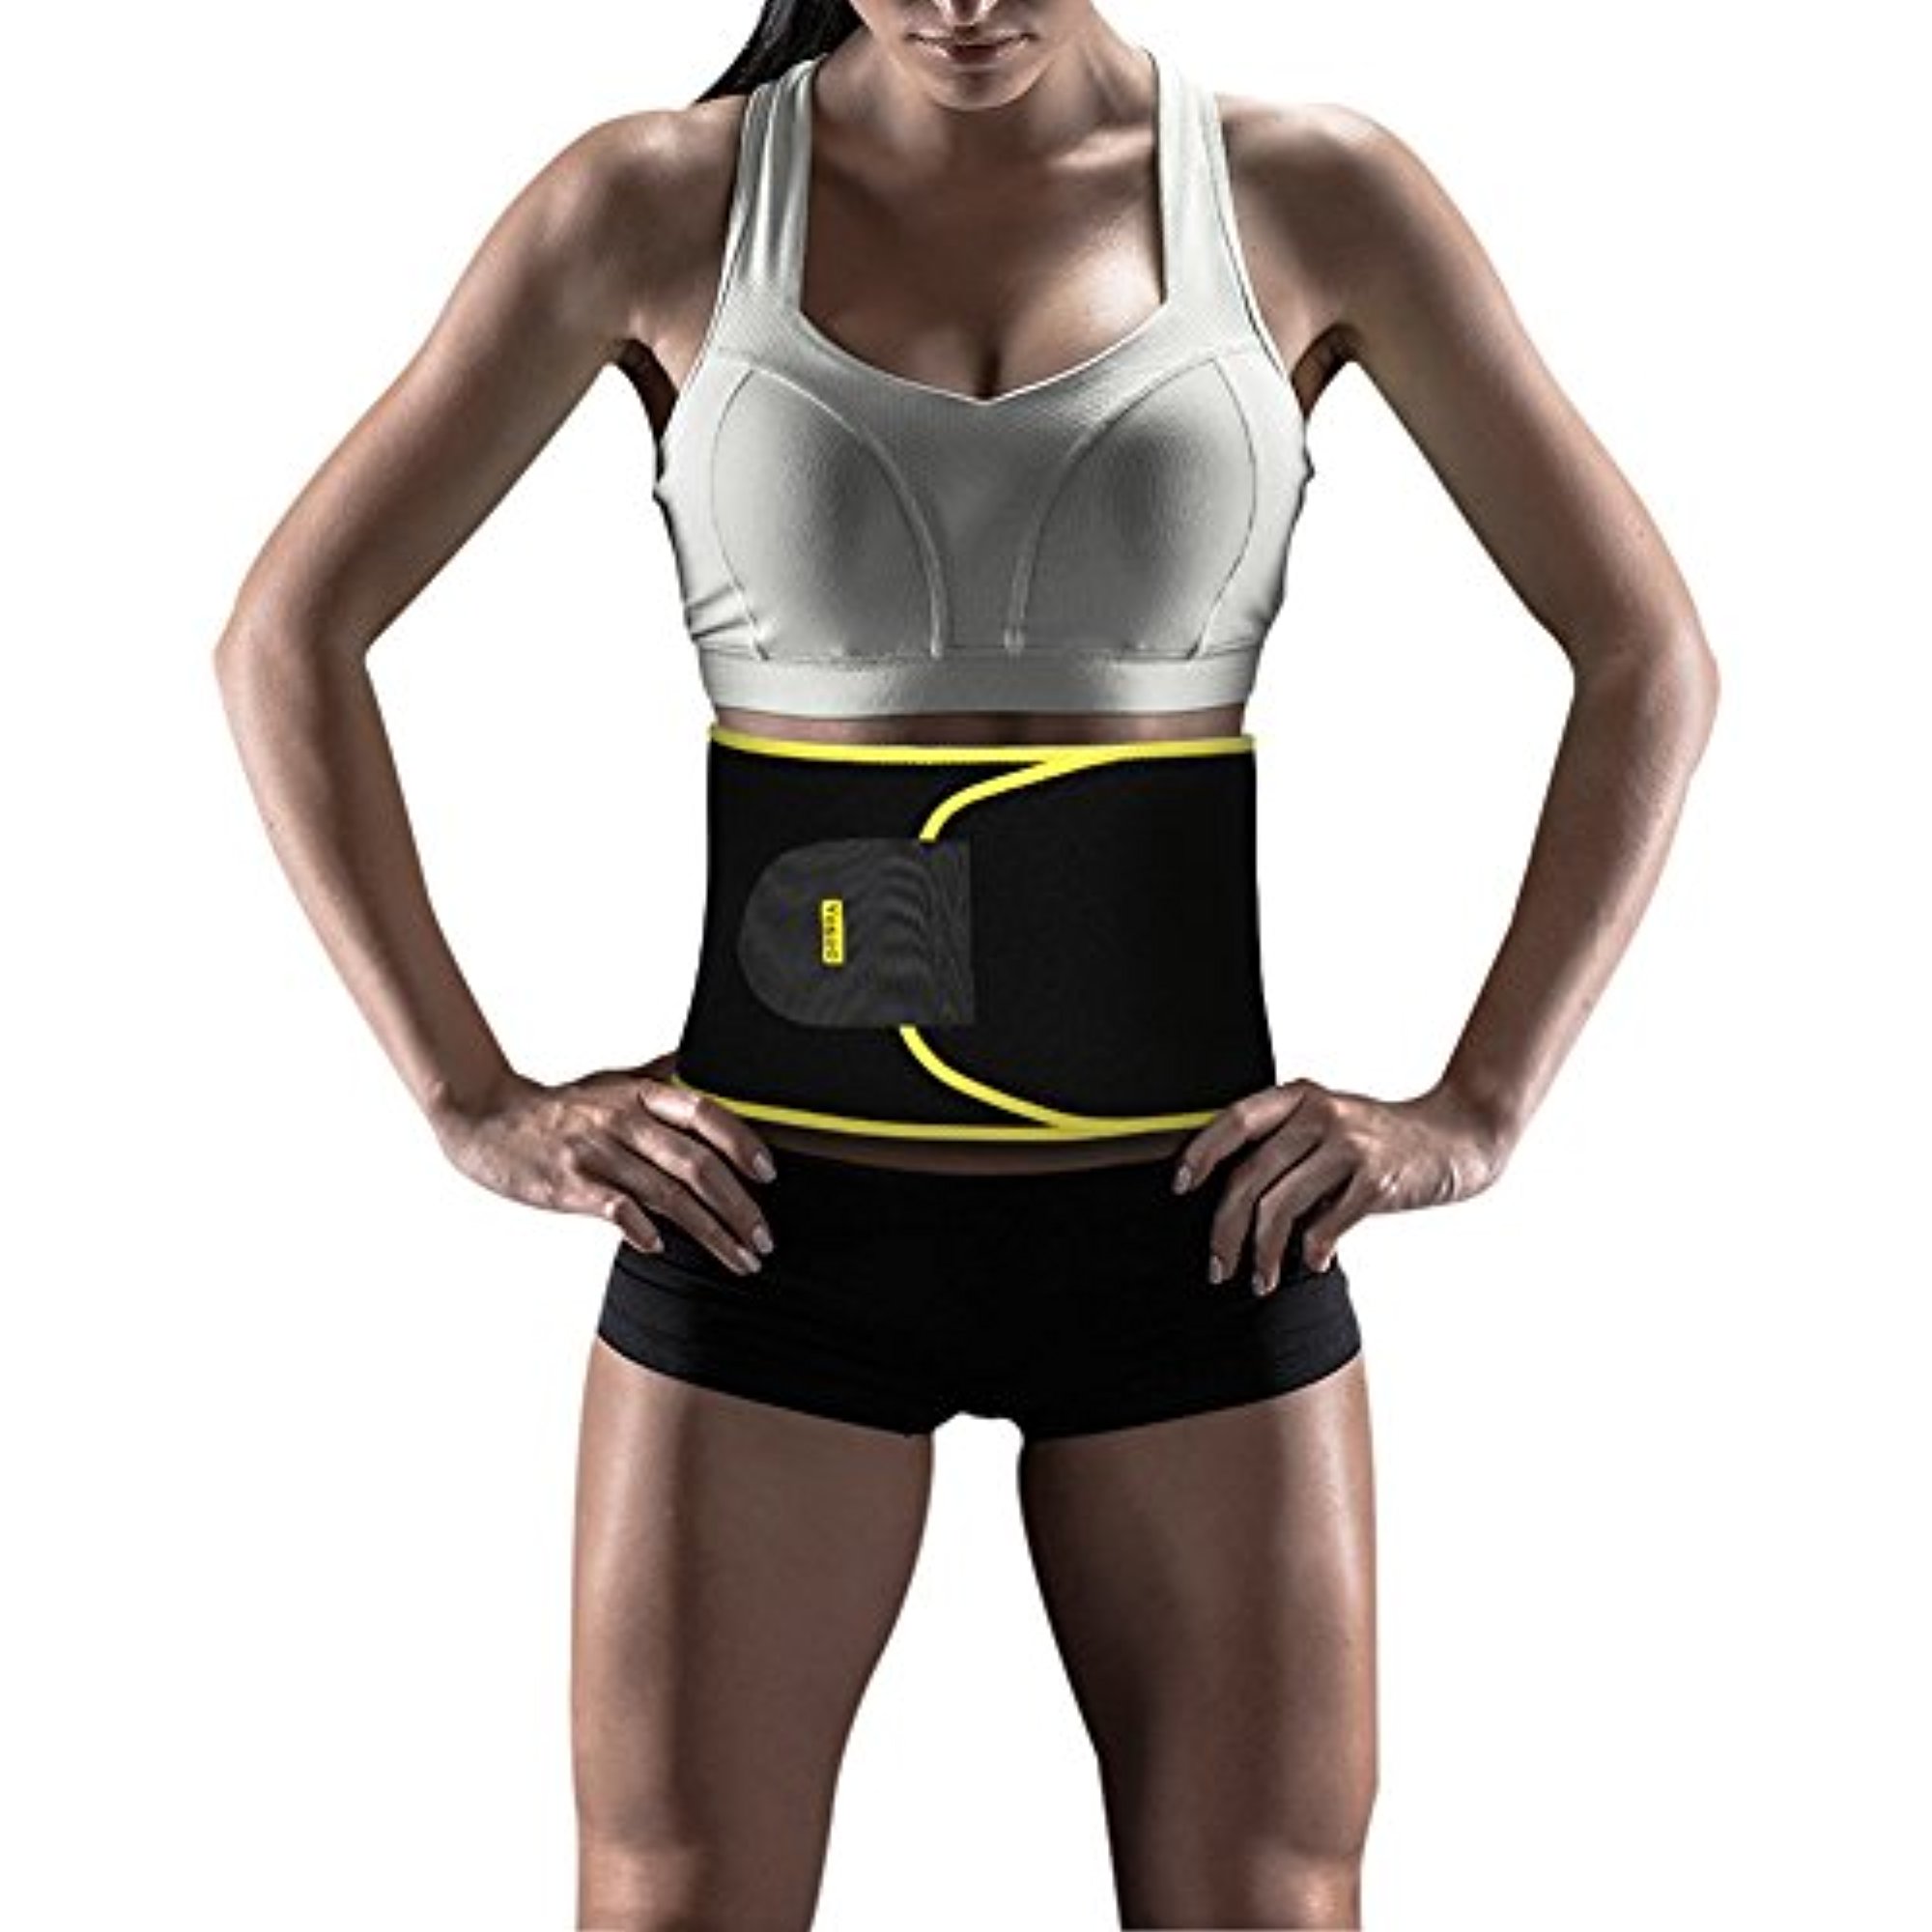 Sweat Waist Trainer for Women Waist Trimmer Weight Loss Lower Stomach Exercise Workout Belt to Stimulate Sweating